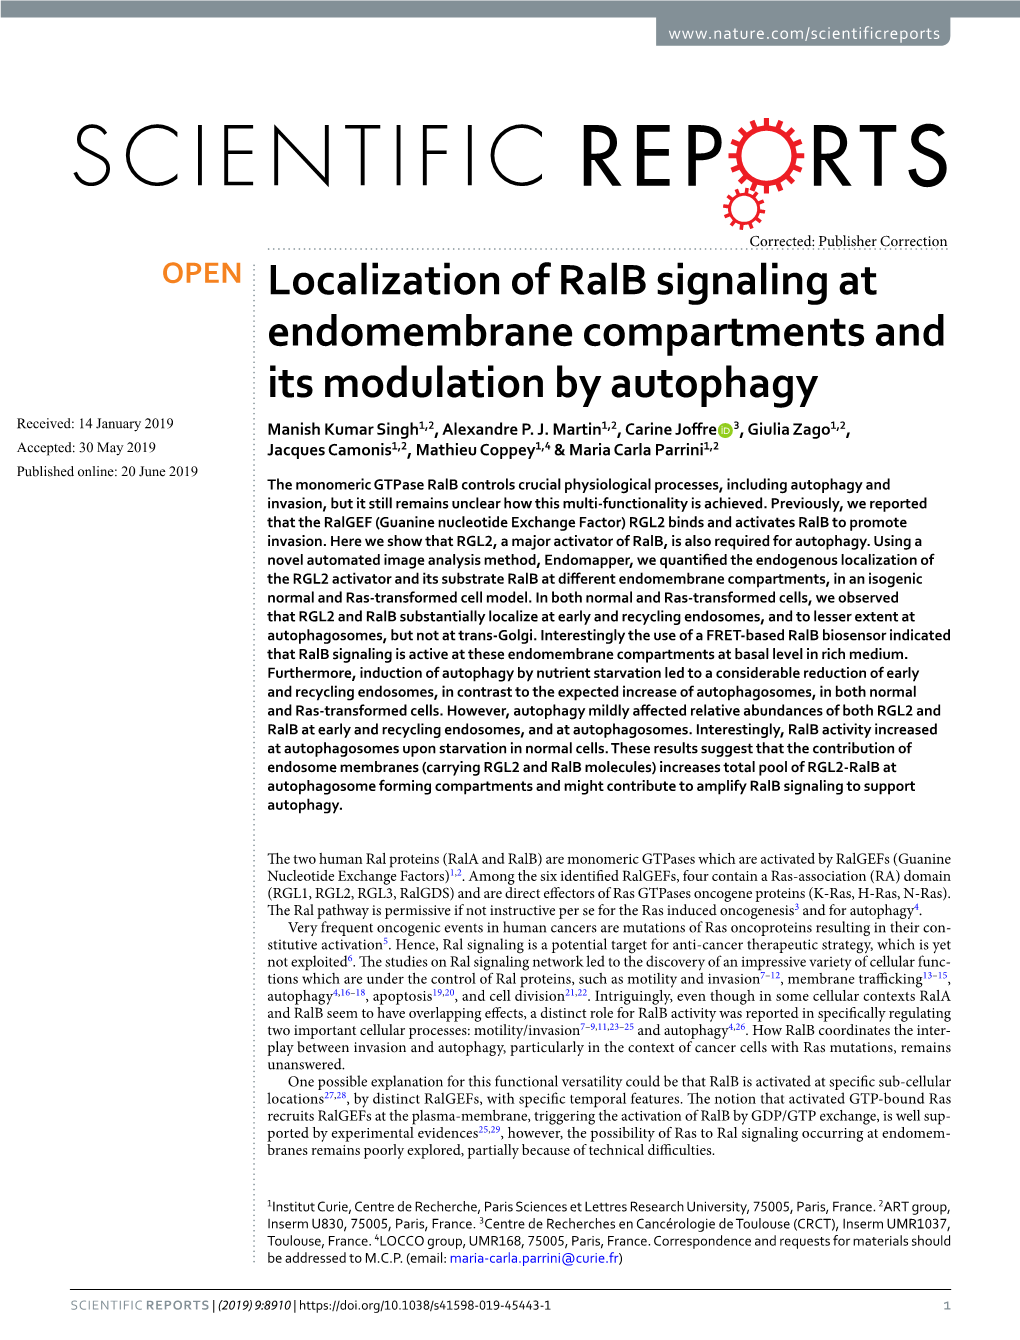 Localization of Ralb Signaling at Endomembrane Compartments and Its Modulation by Autophagy Received: 14 January 2019 Manish Kumar Singh1,2, Alexandre P